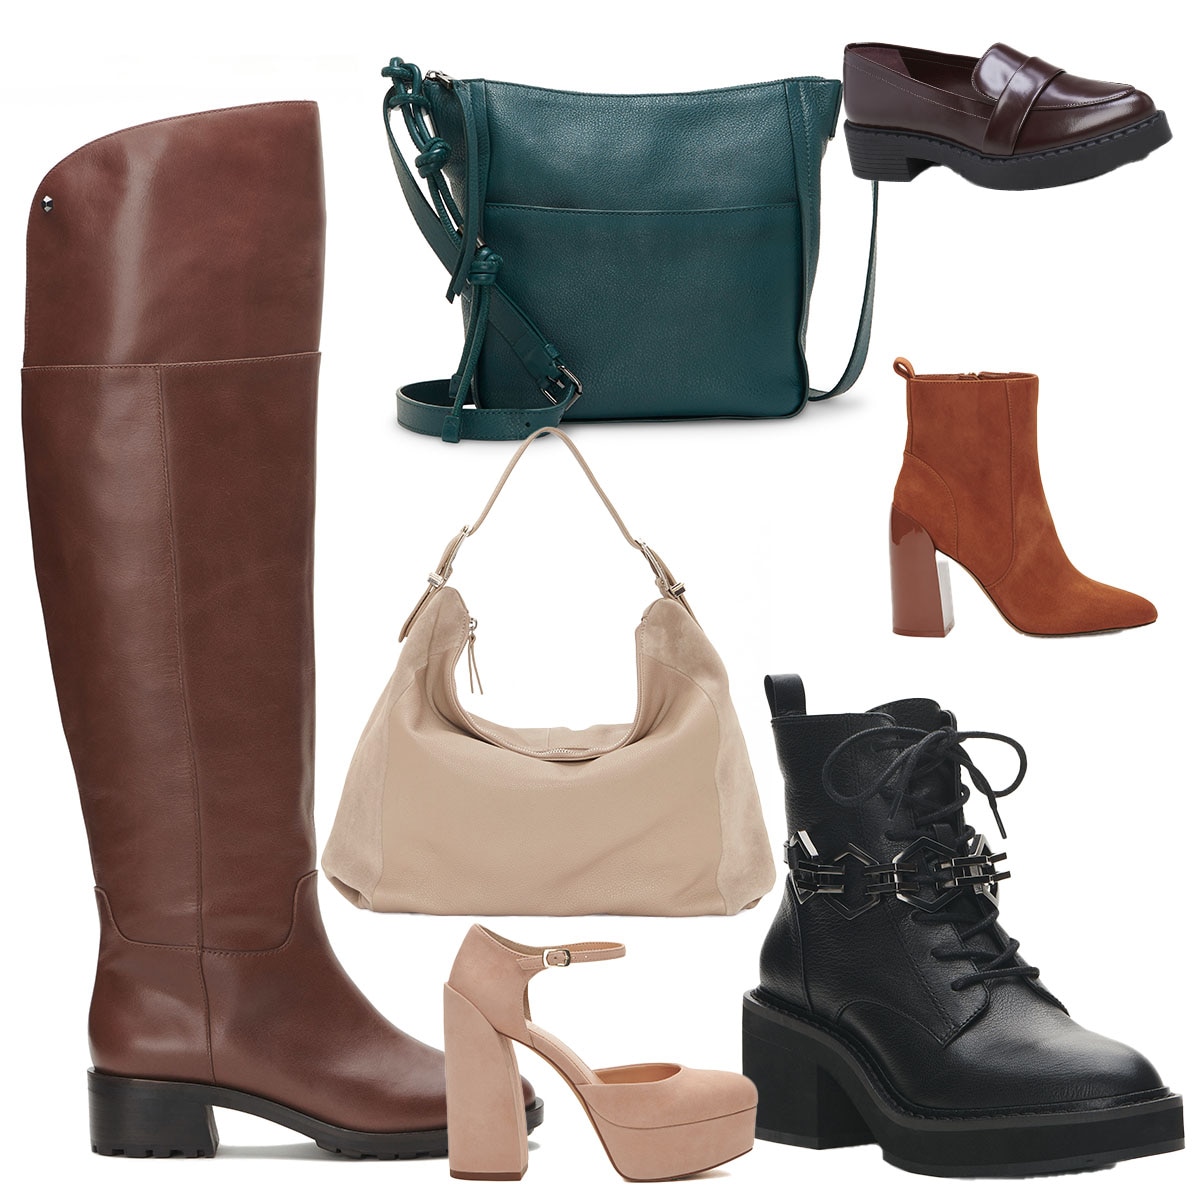 Vince Camuto Fall Launch: 7 Faves & Finds Under $250